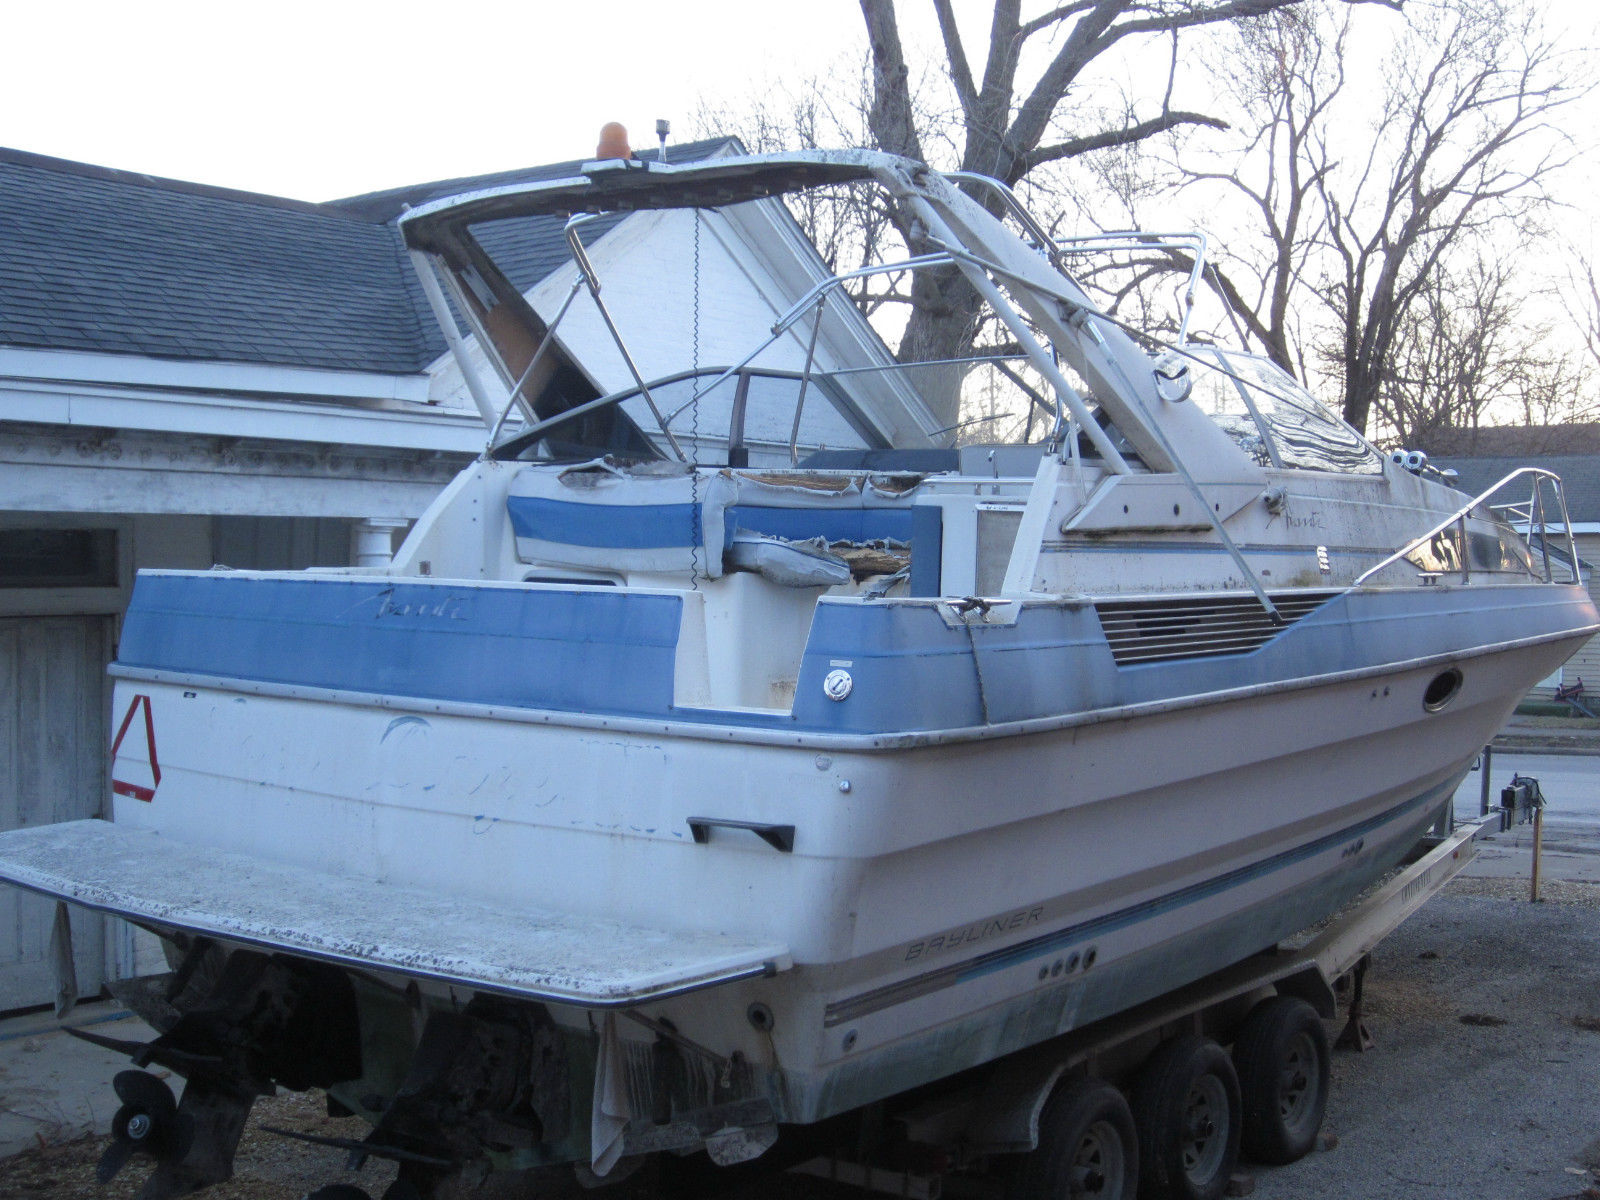 bayliner-avanti-3250-1988-for-sale-for-5-000-boats-from-usa